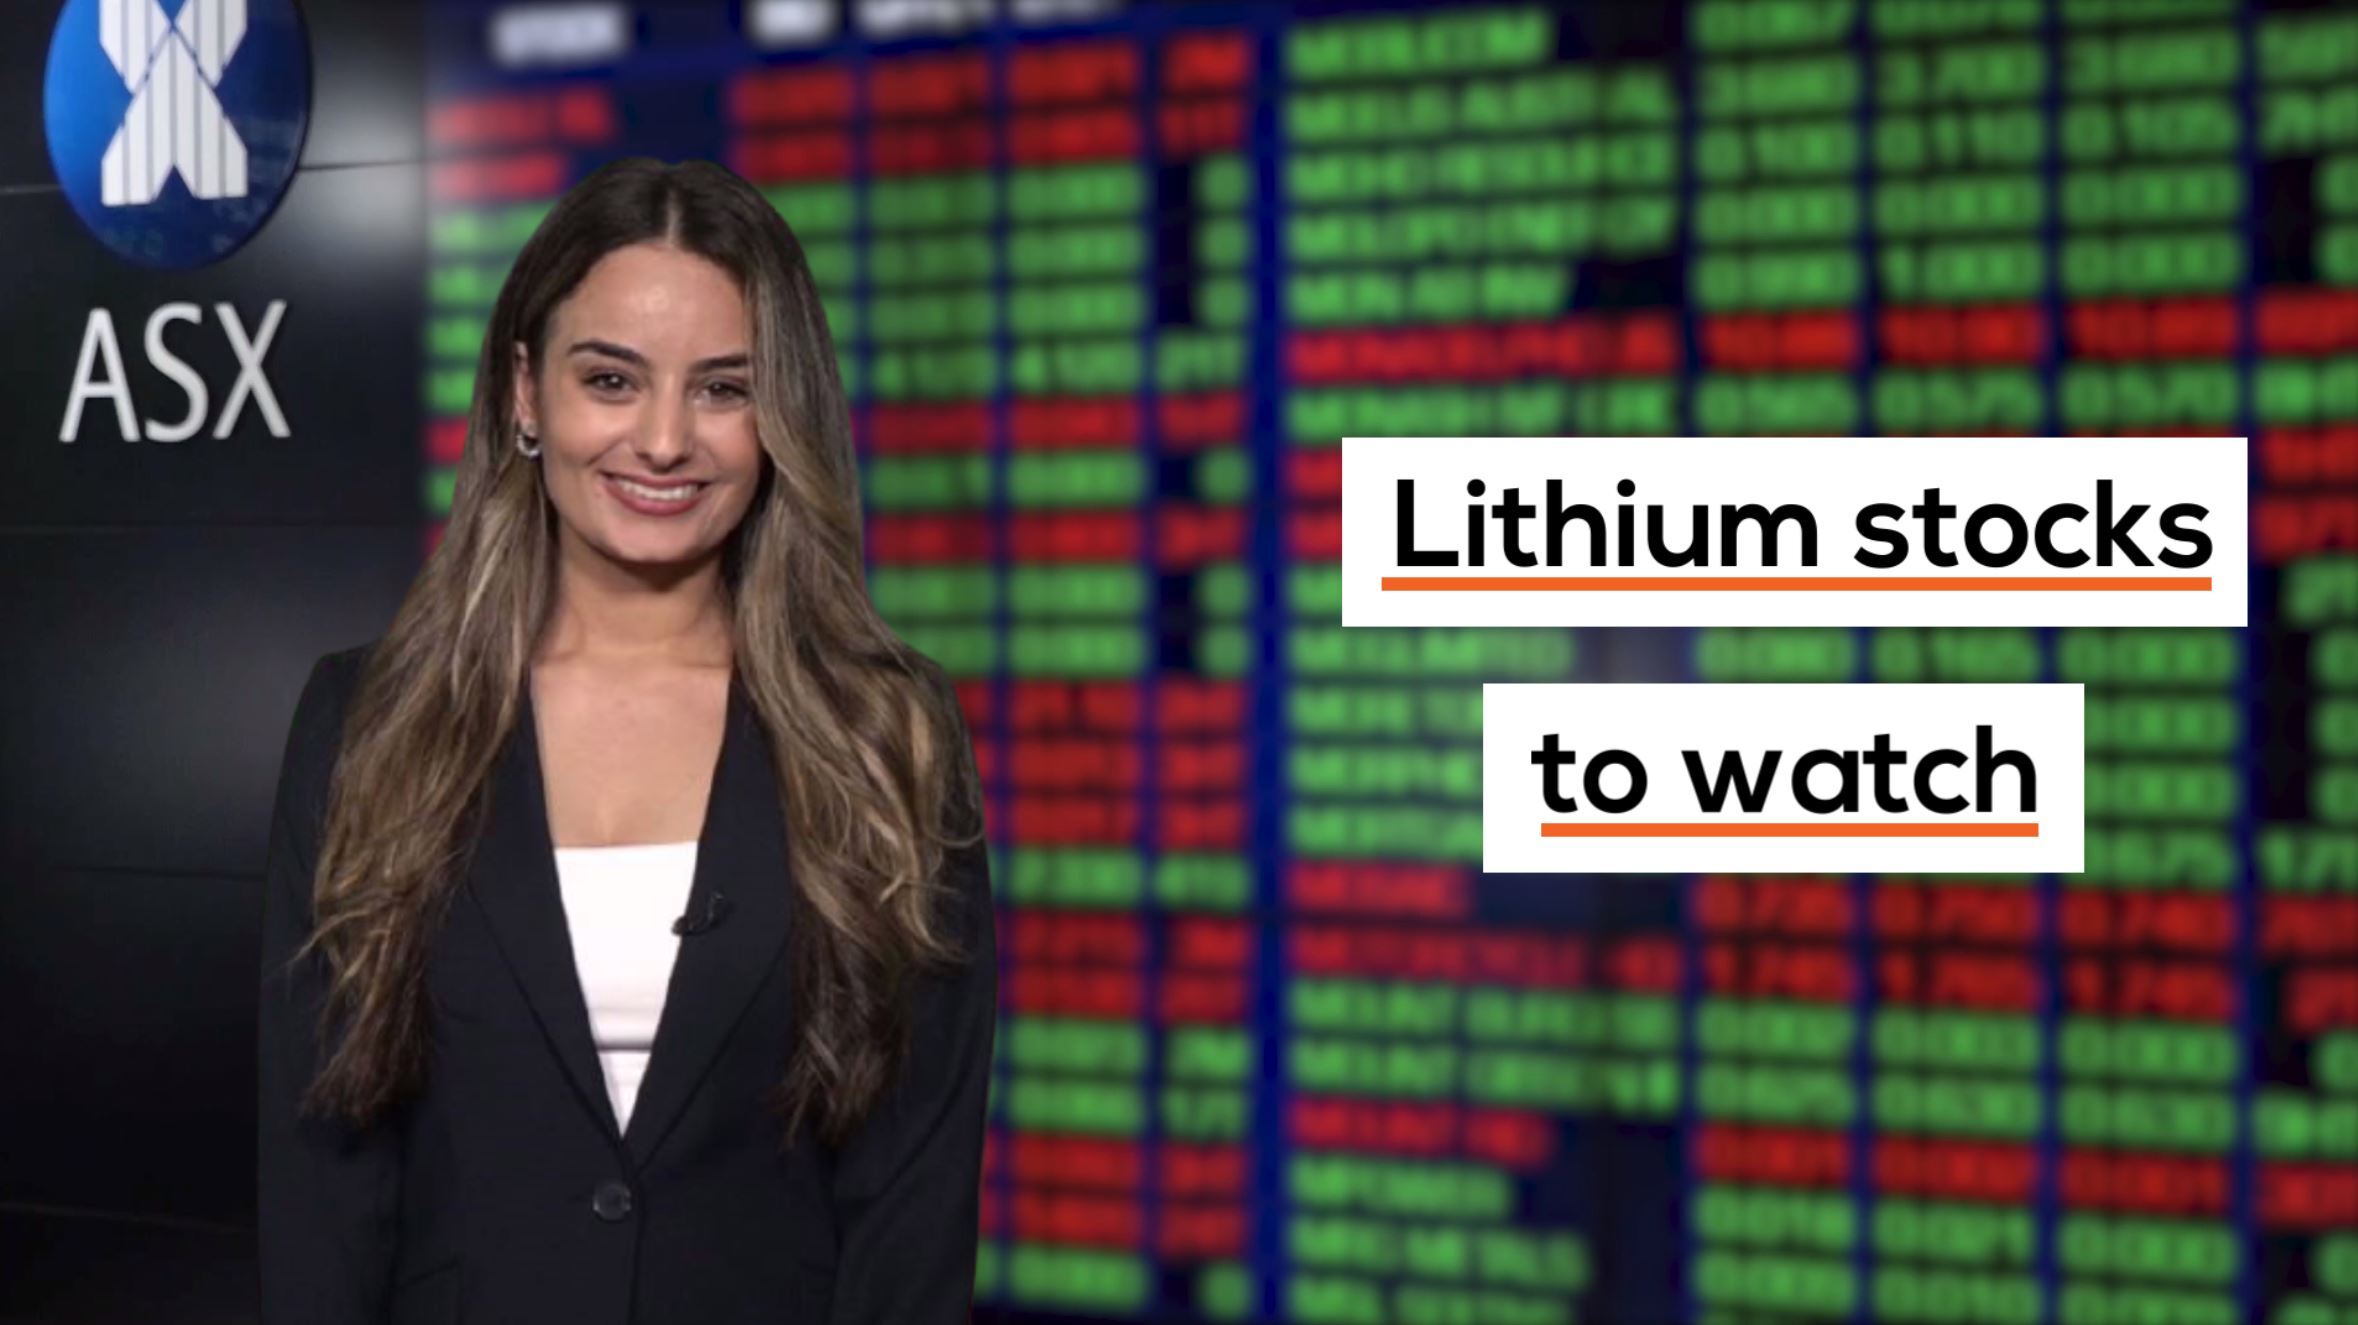 Lithium stocks to watch